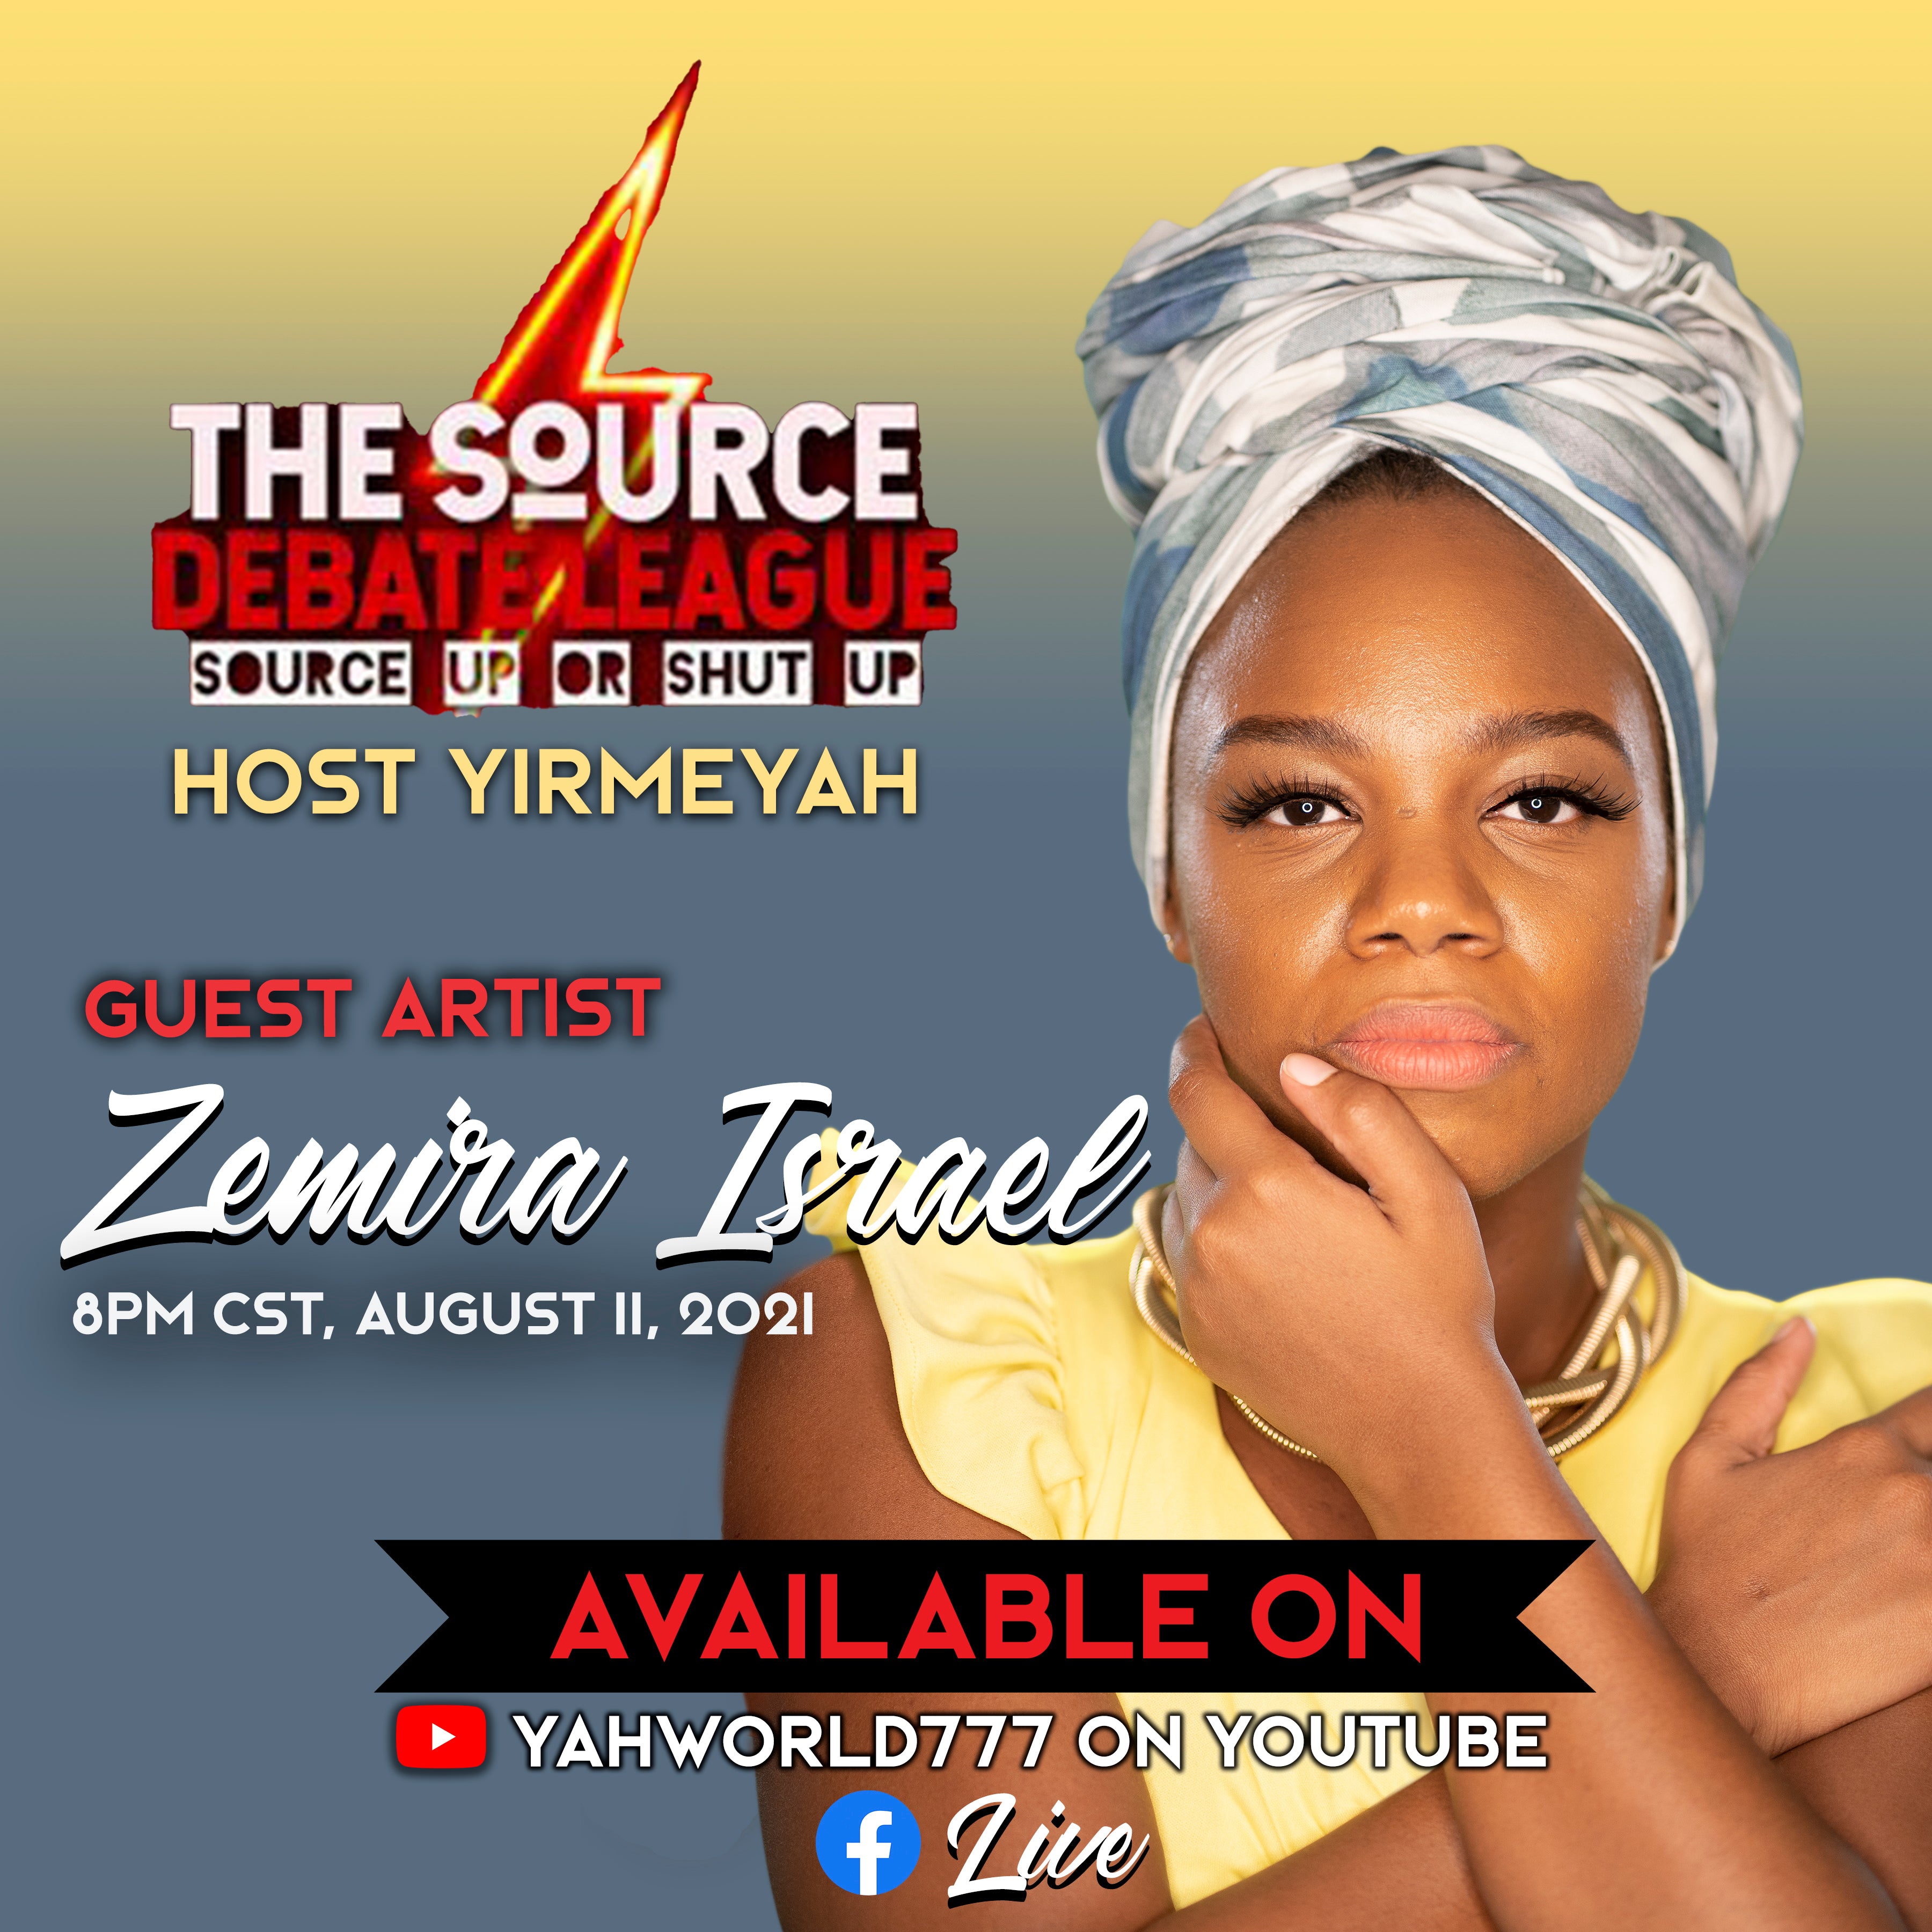 Zemira Israel interview with brother Yirmeyah of The Source Debate 